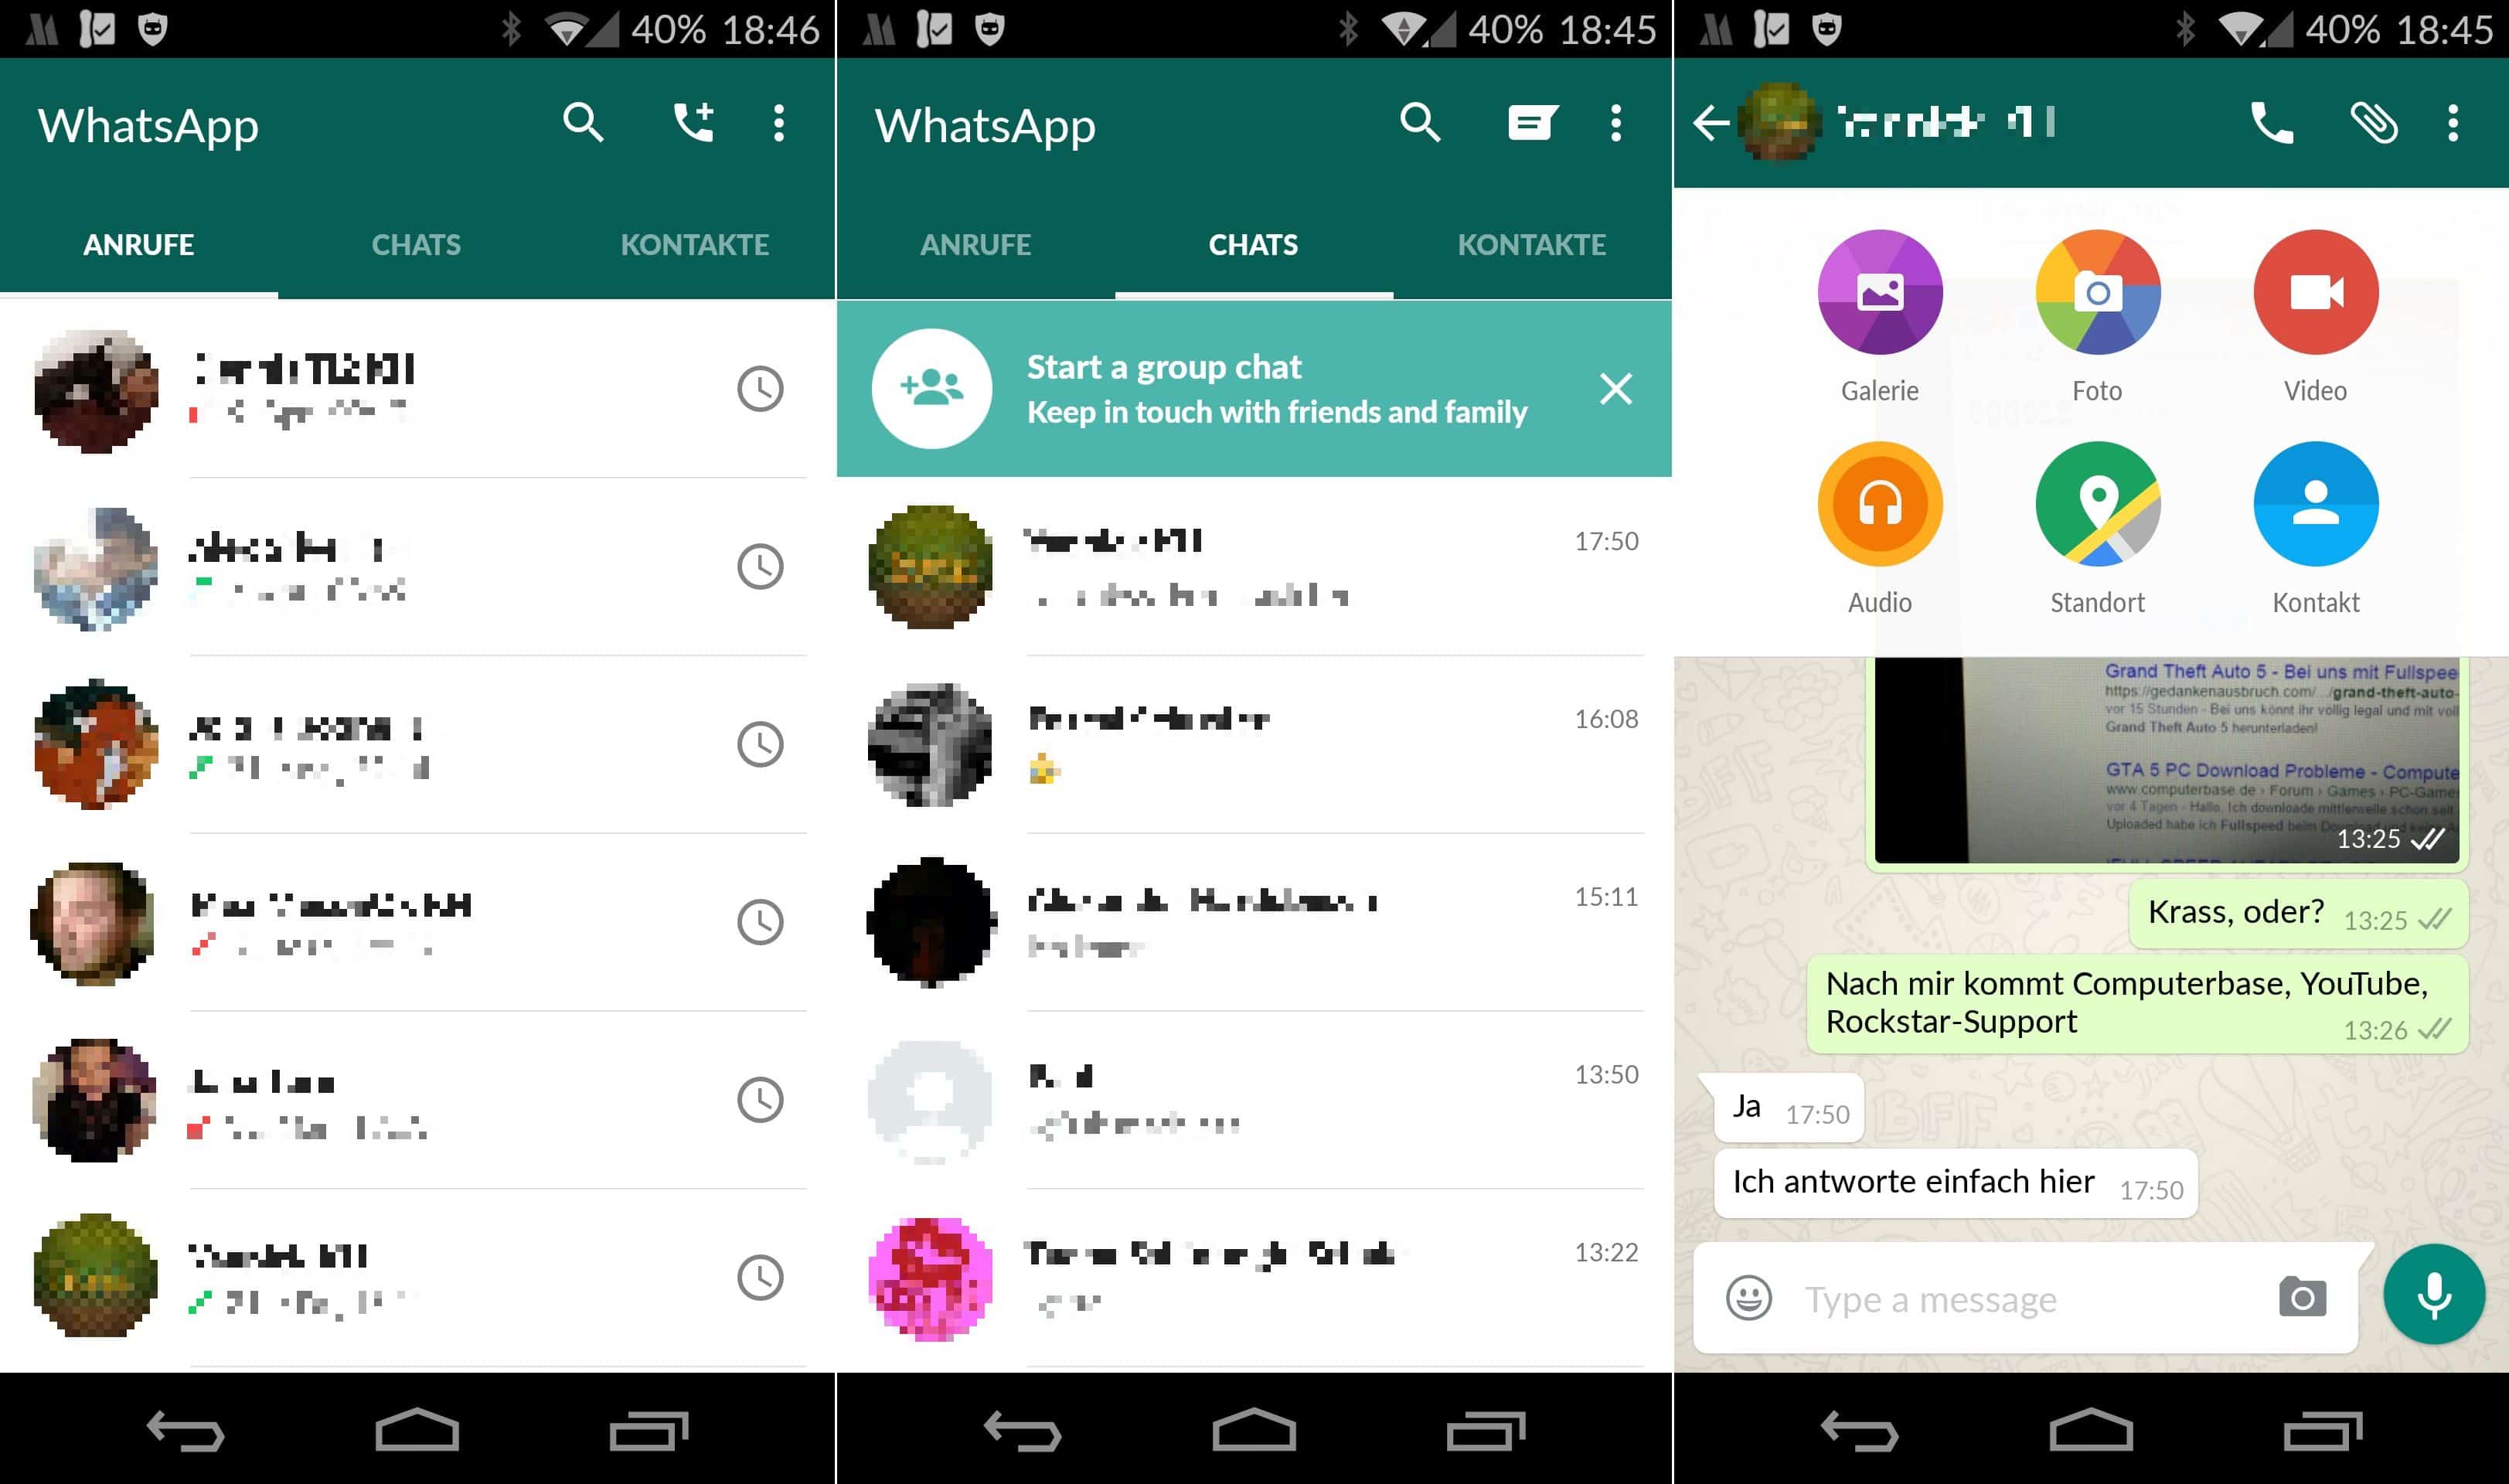 WhatsApp - Android Material Design